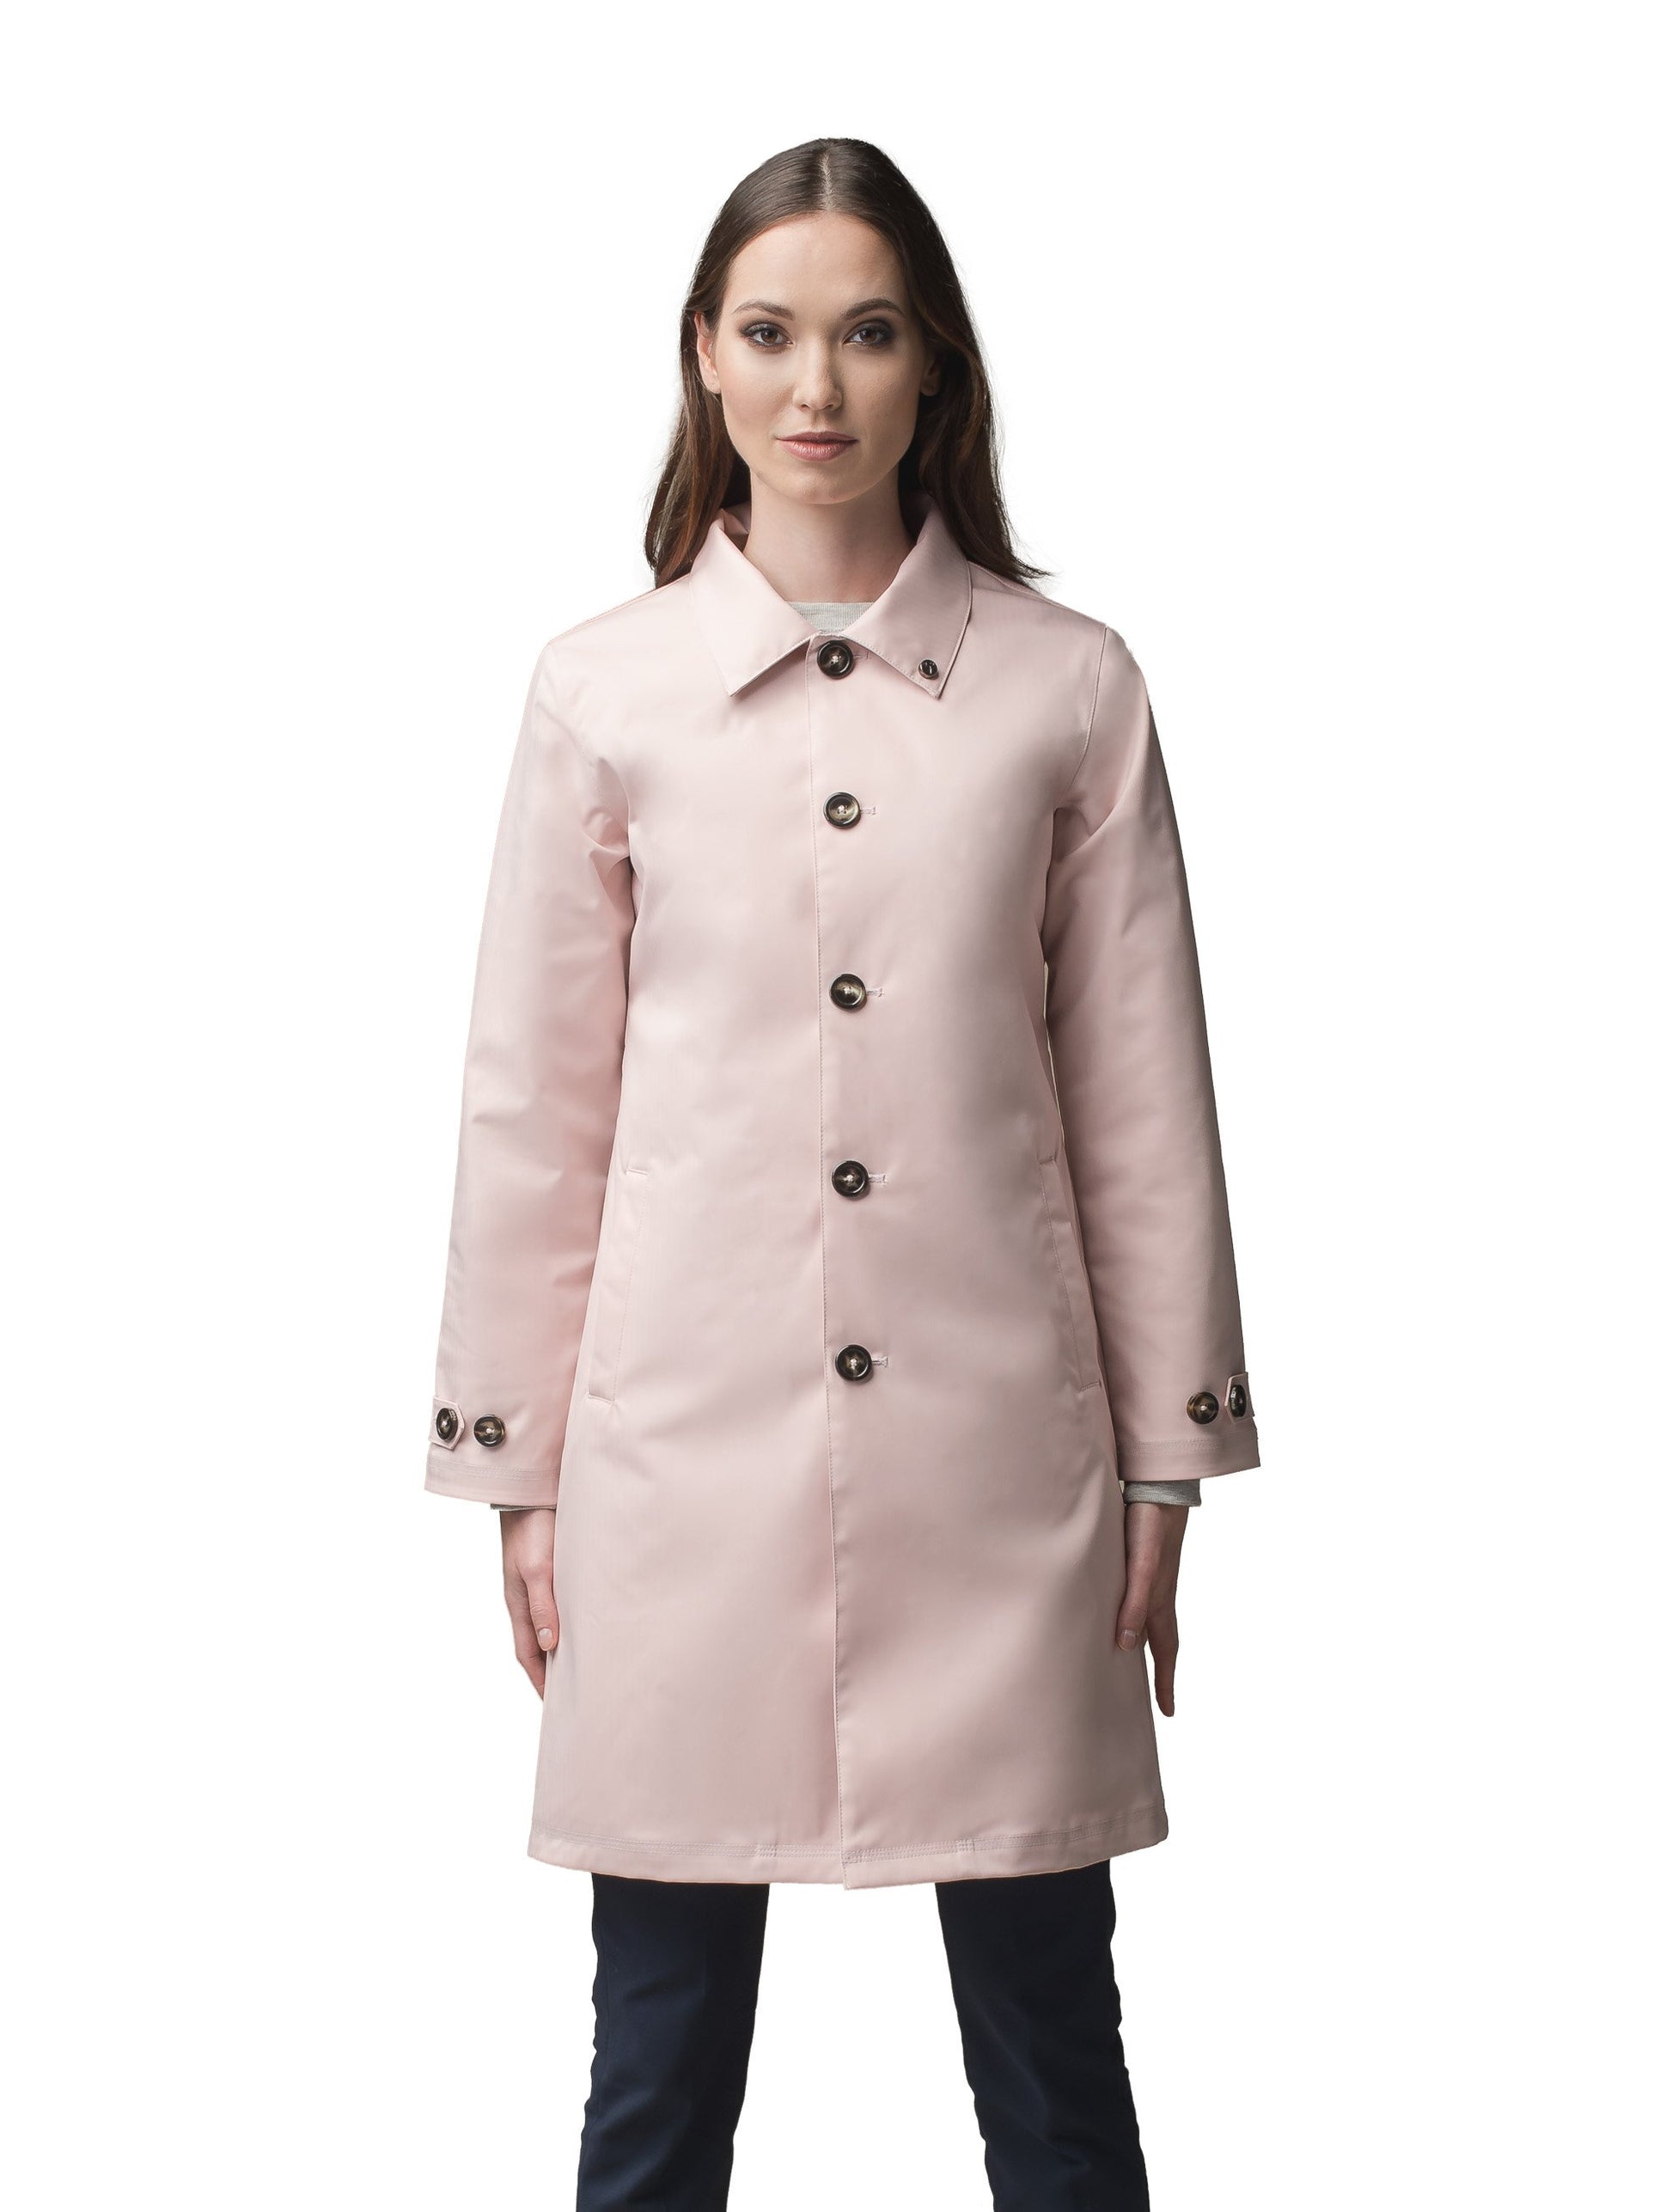 Women's thigh length Mackintosh jacket in Dusty Rose